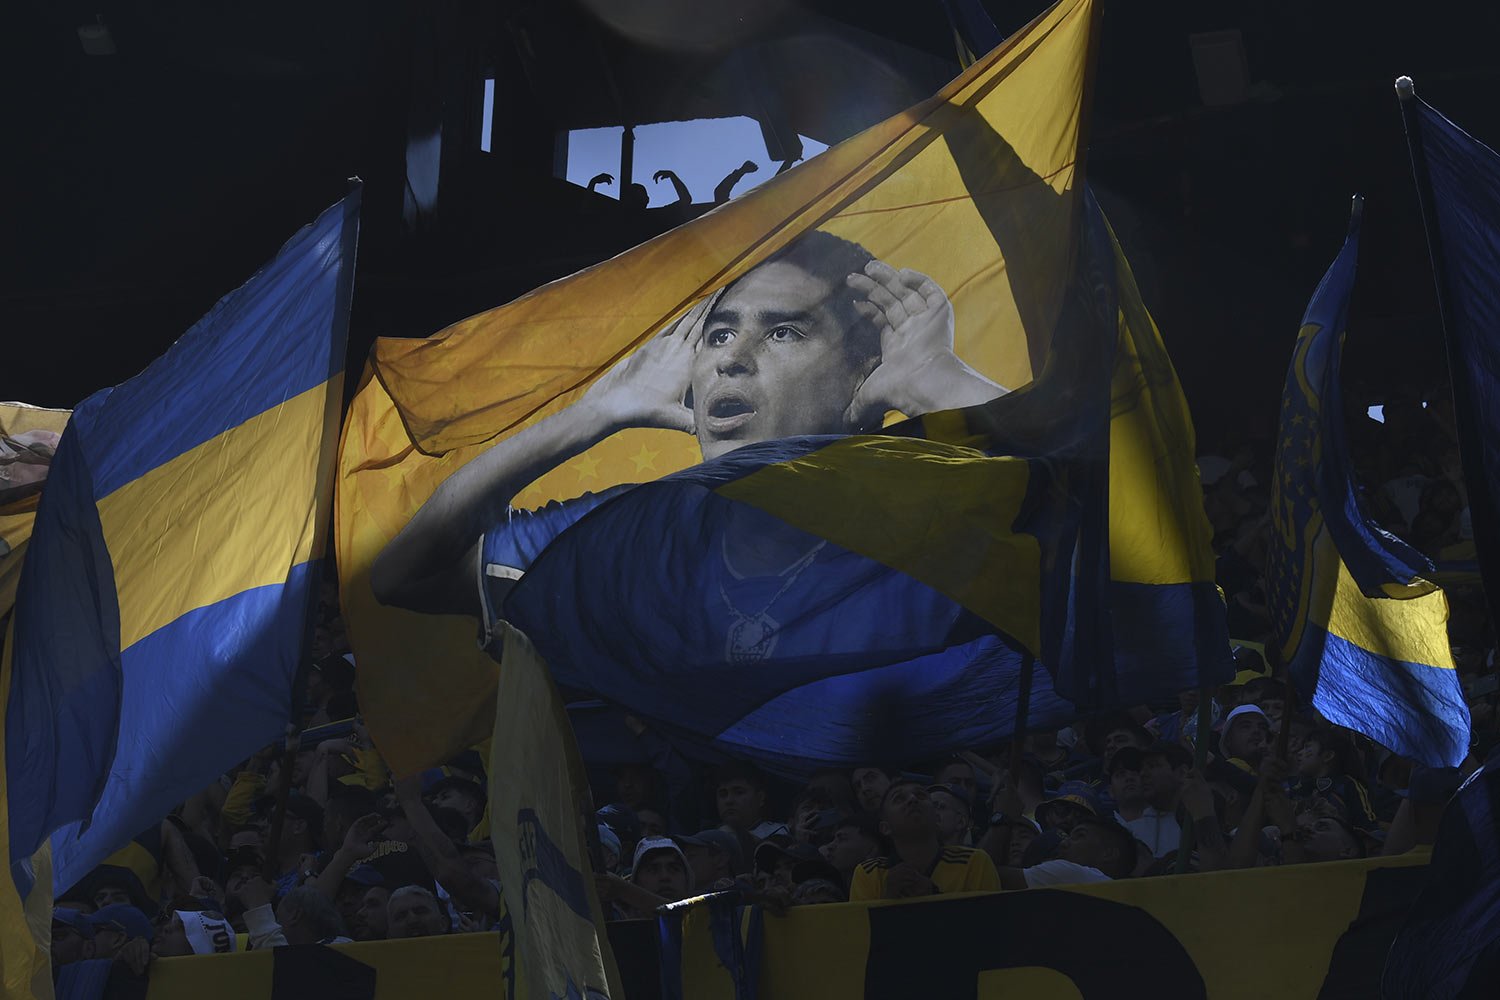  Fans of the Boca Juniors soccer team wave a flag featuring the club's Vice President Juan Ramon Riquelme, who is a former player with the team, during a local tournament soccer match with River Plate at La Bombonera stadium in Buenos Aires, Argentin